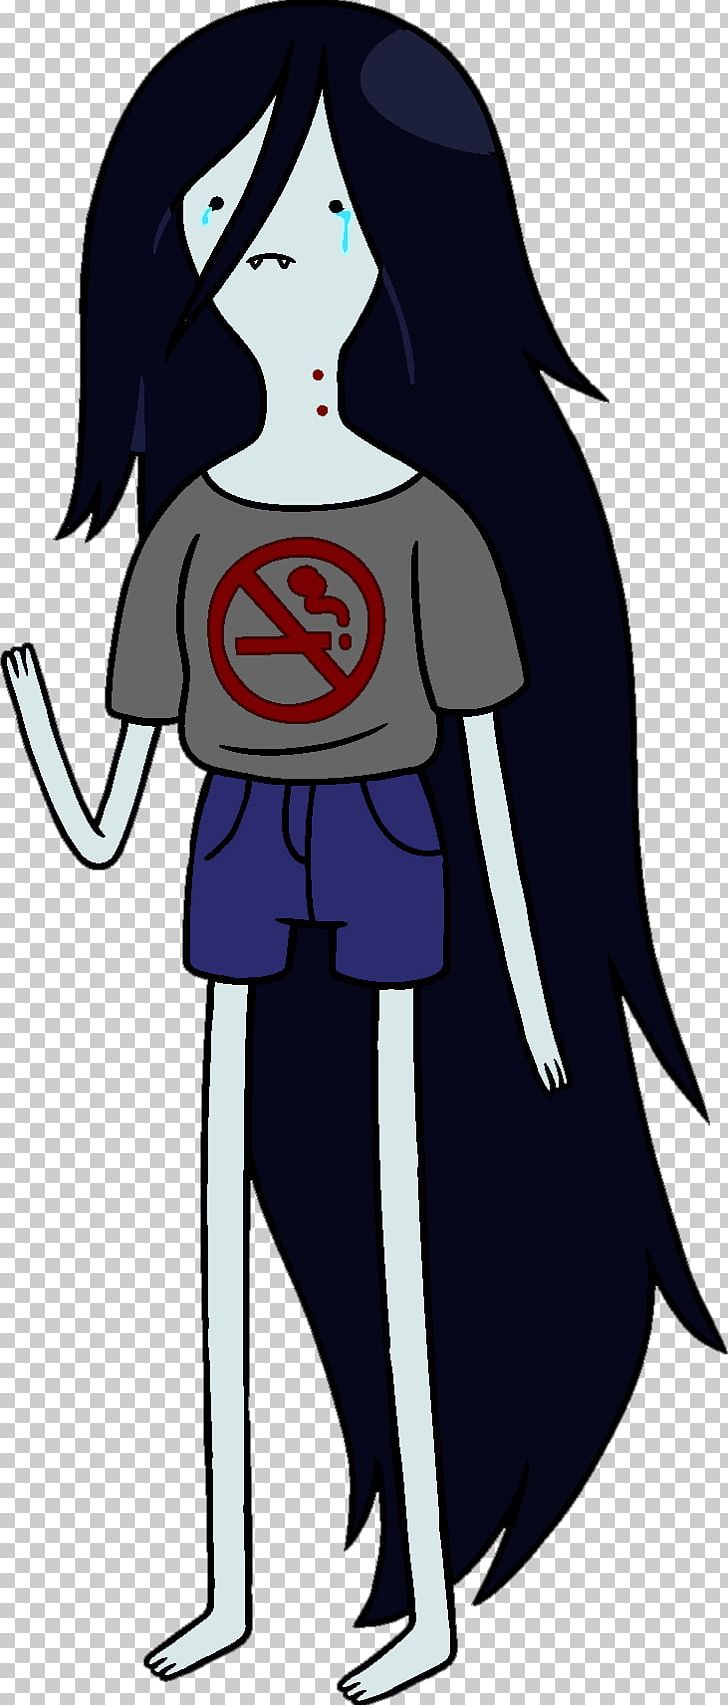 Marceline The Vampire Queen Ice King Finn The Human Princess Bubblegum Fashion PNG, Clipart, Adventure Time, Art, Cartoon, Cartoon Network, Character Free PNG Download